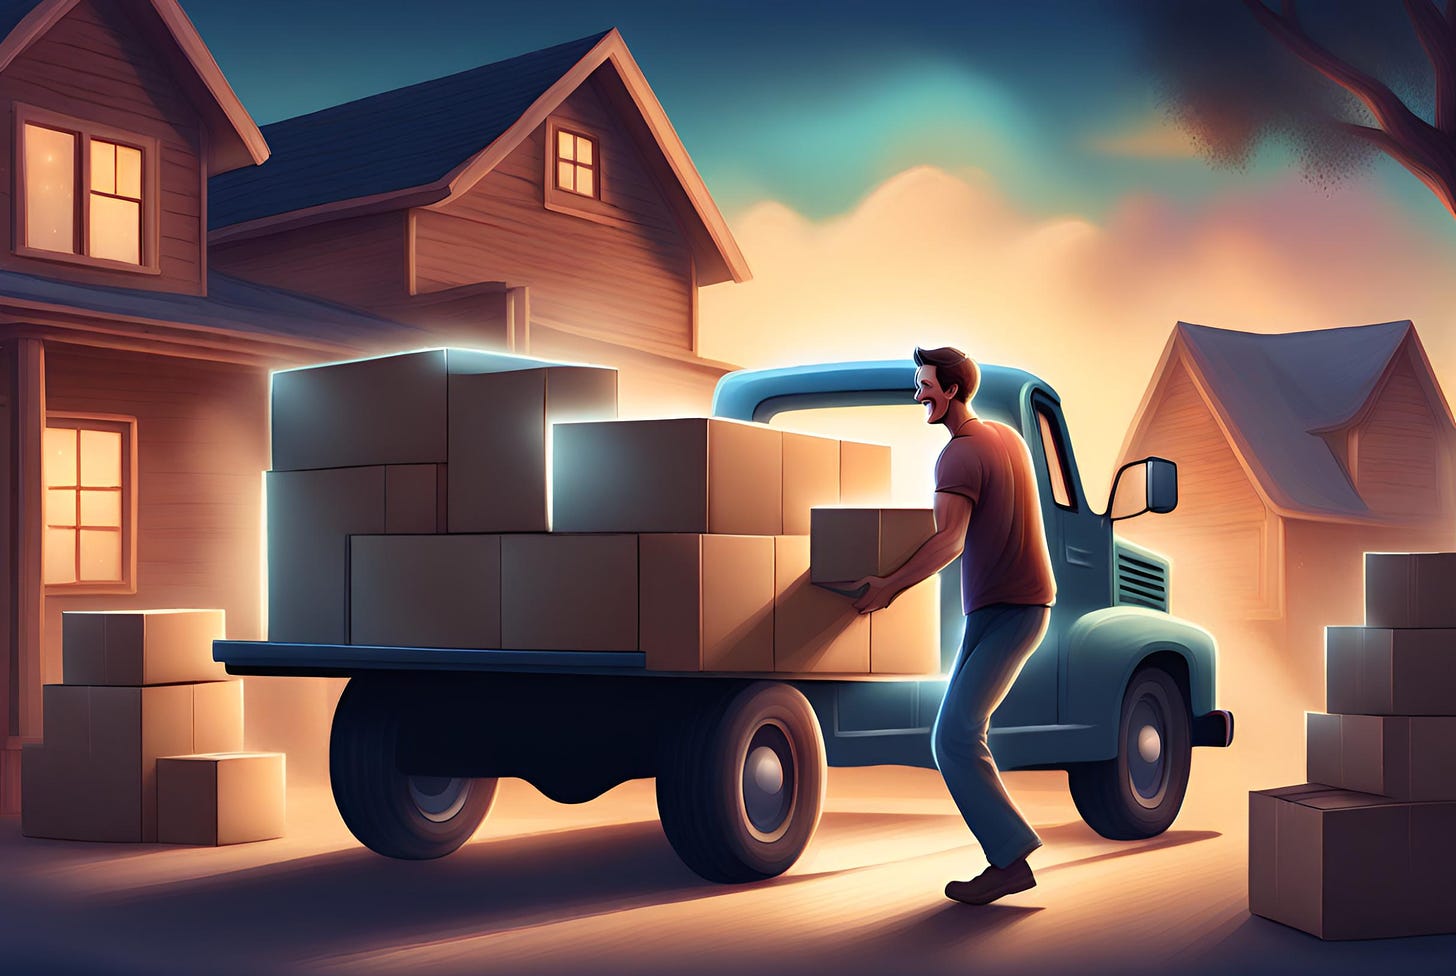 Illustration of a man unloading boxes from the back of a pickup truck